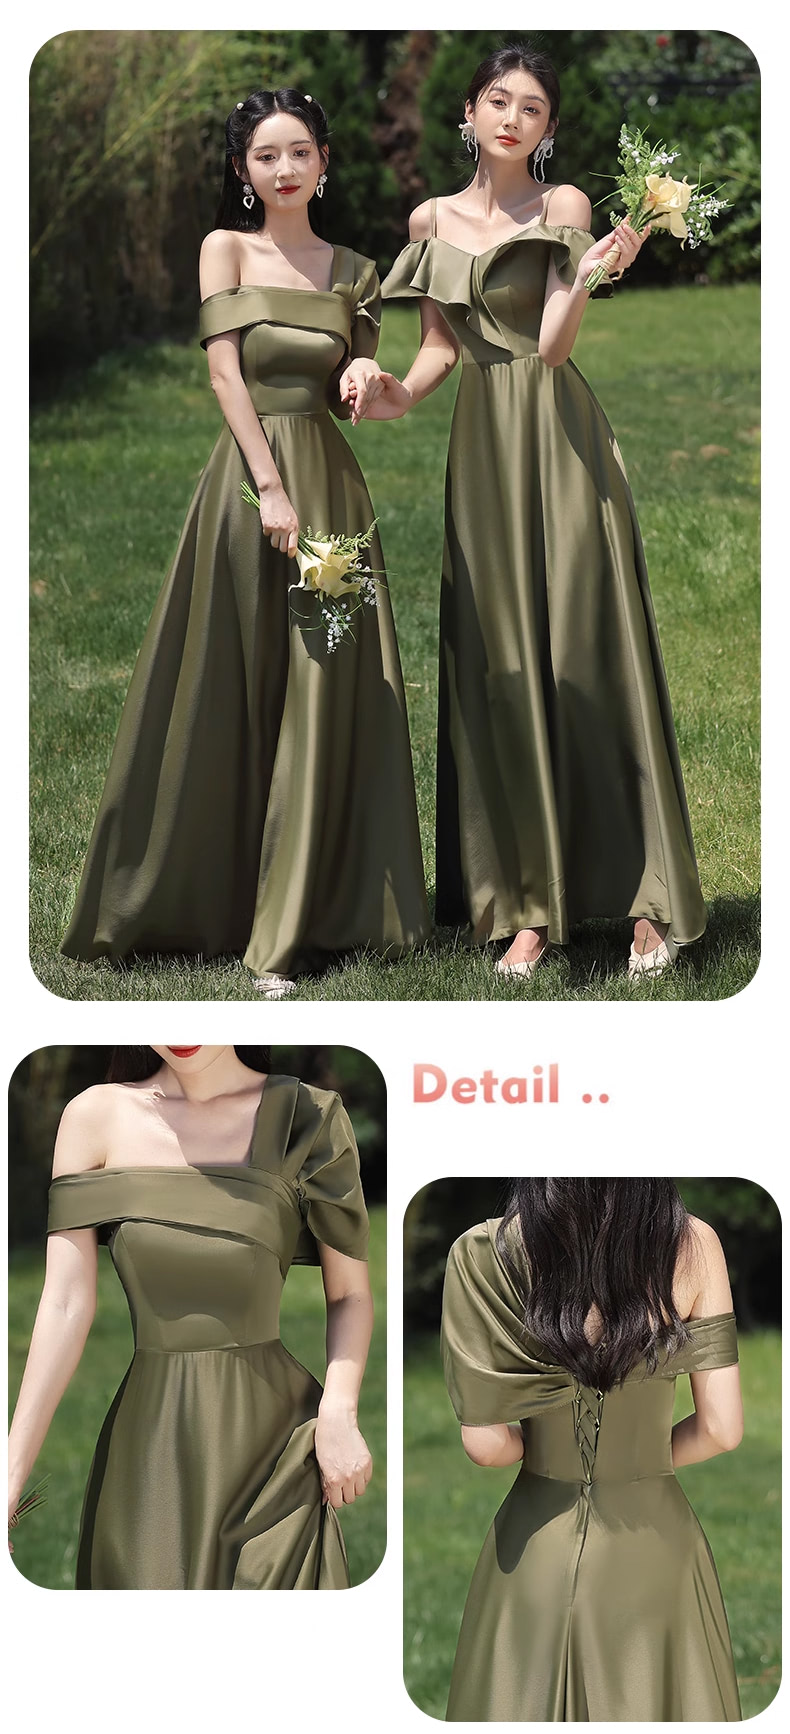 Simple-Green-Satin-Bridesmaid-Dress-Cocktail-Prom-Evening-Gowns21